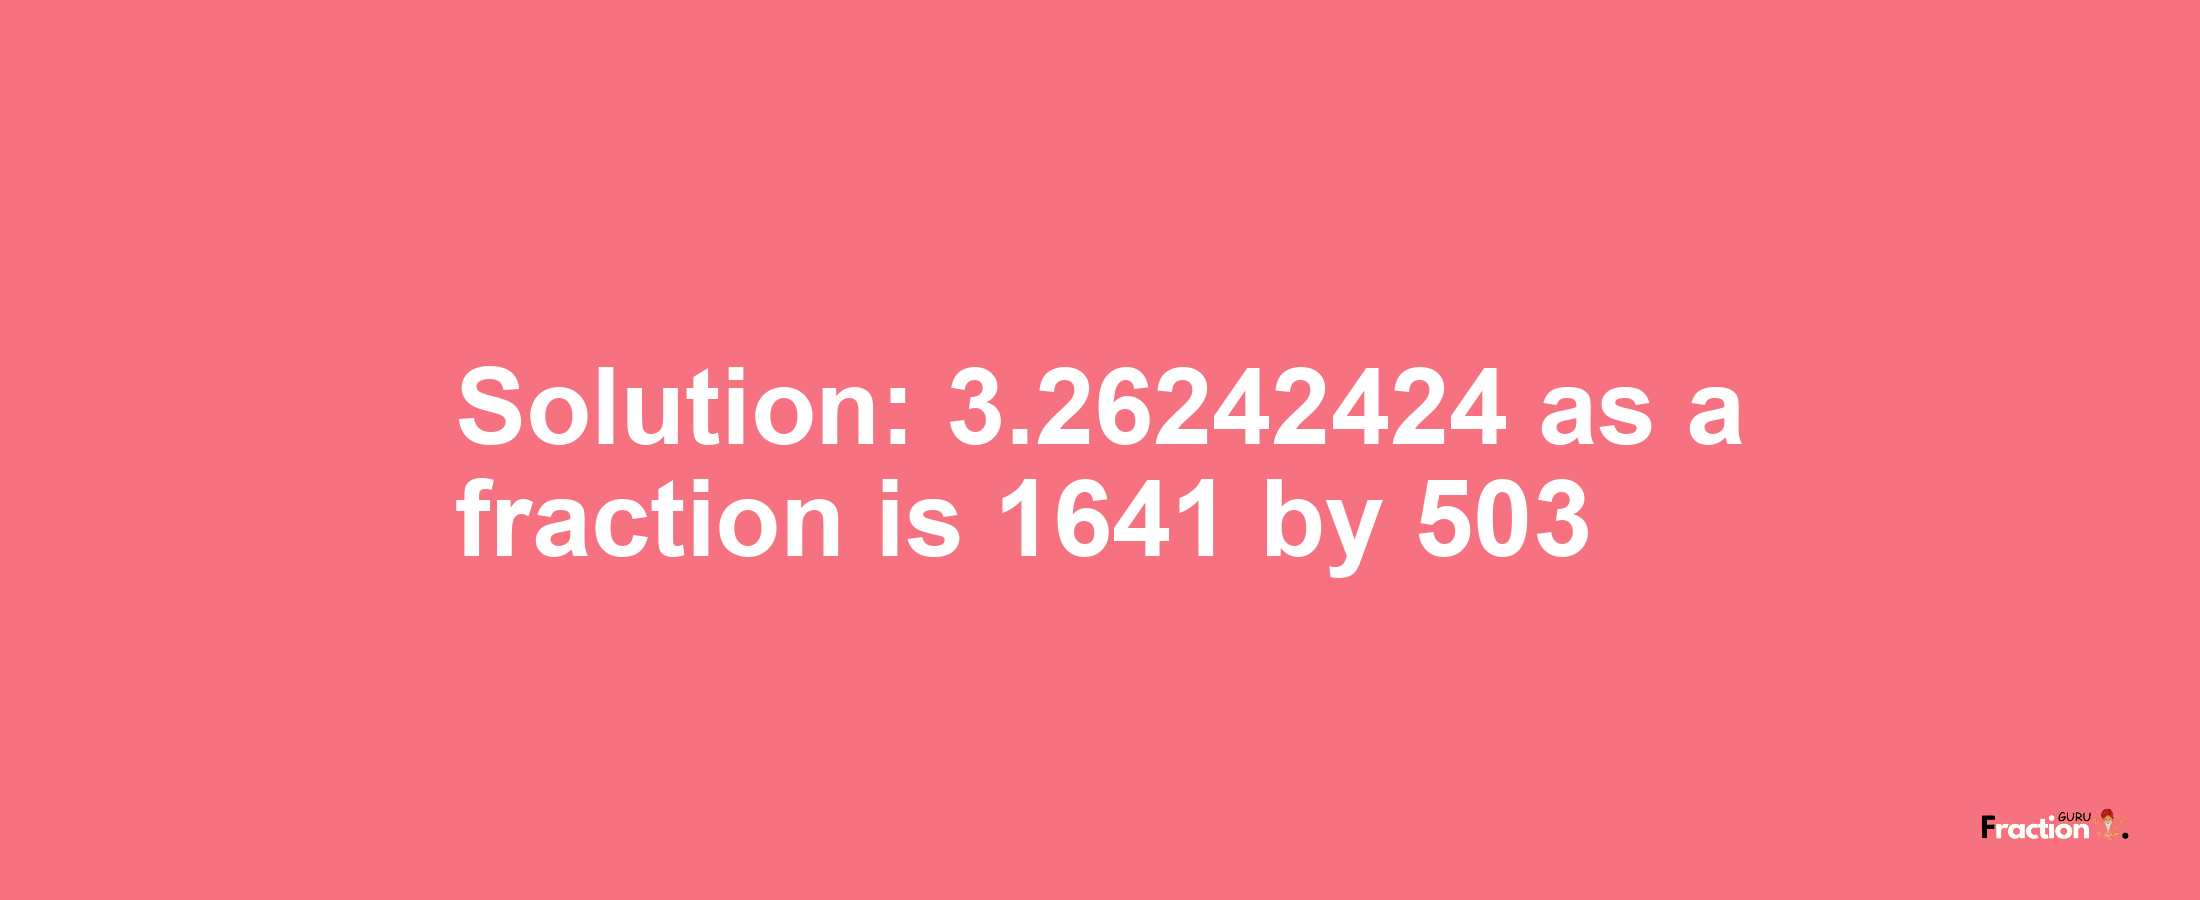 Solution:3.26242424 as a fraction is 1641/503